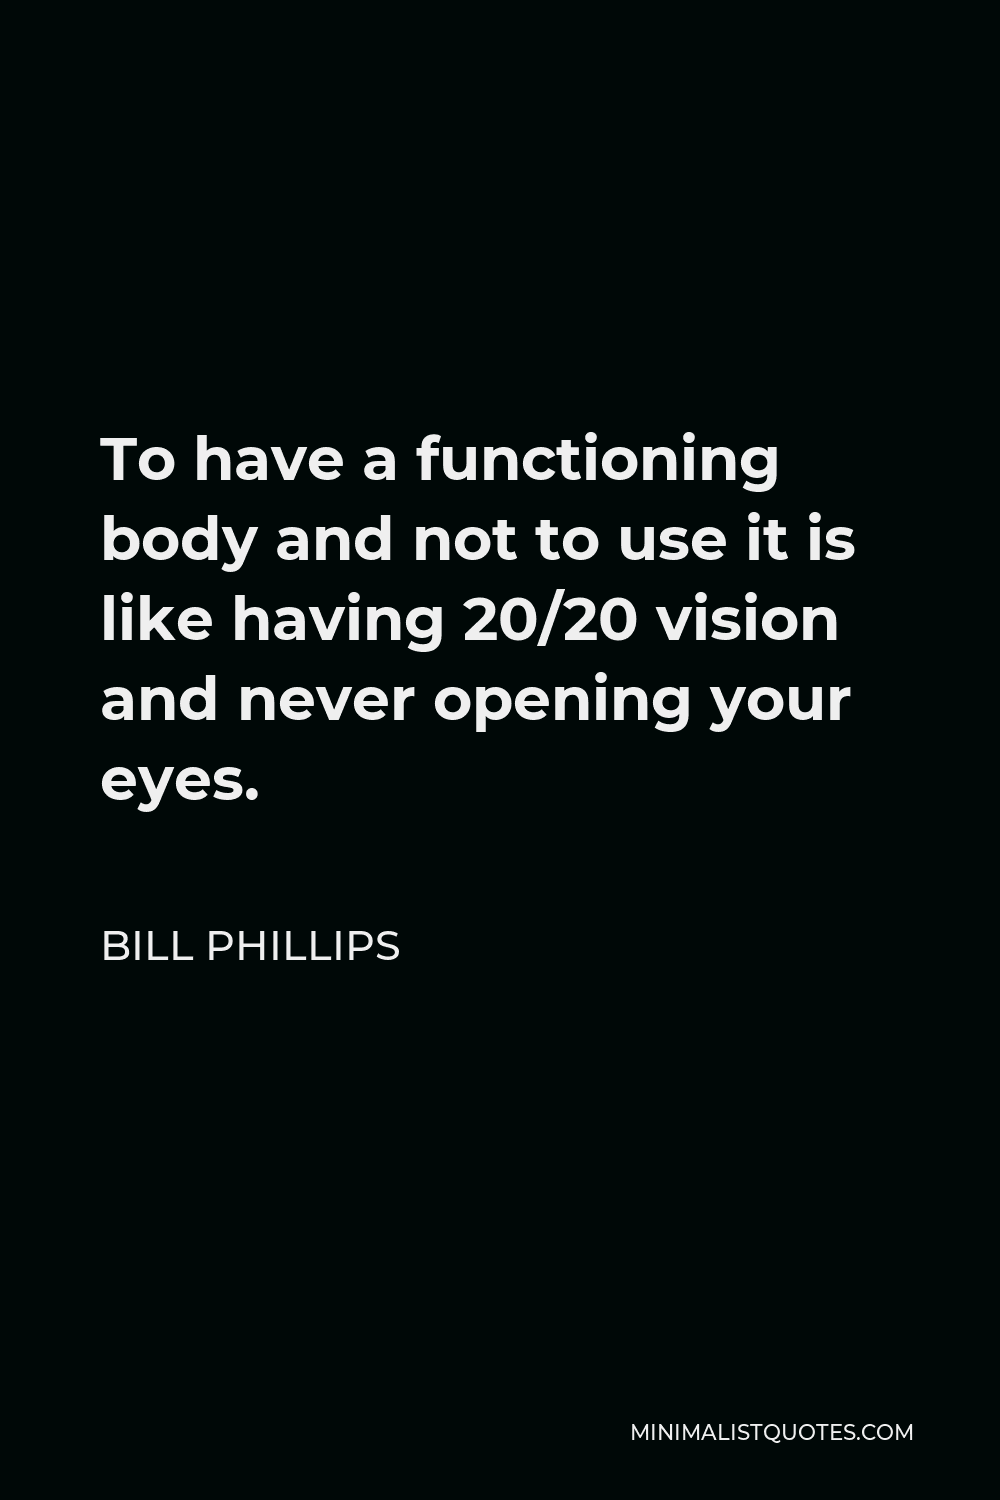 Bill Phillips Quote - To have a functioning body and not to use it is like having 20/20 vision and never opening your eyes.